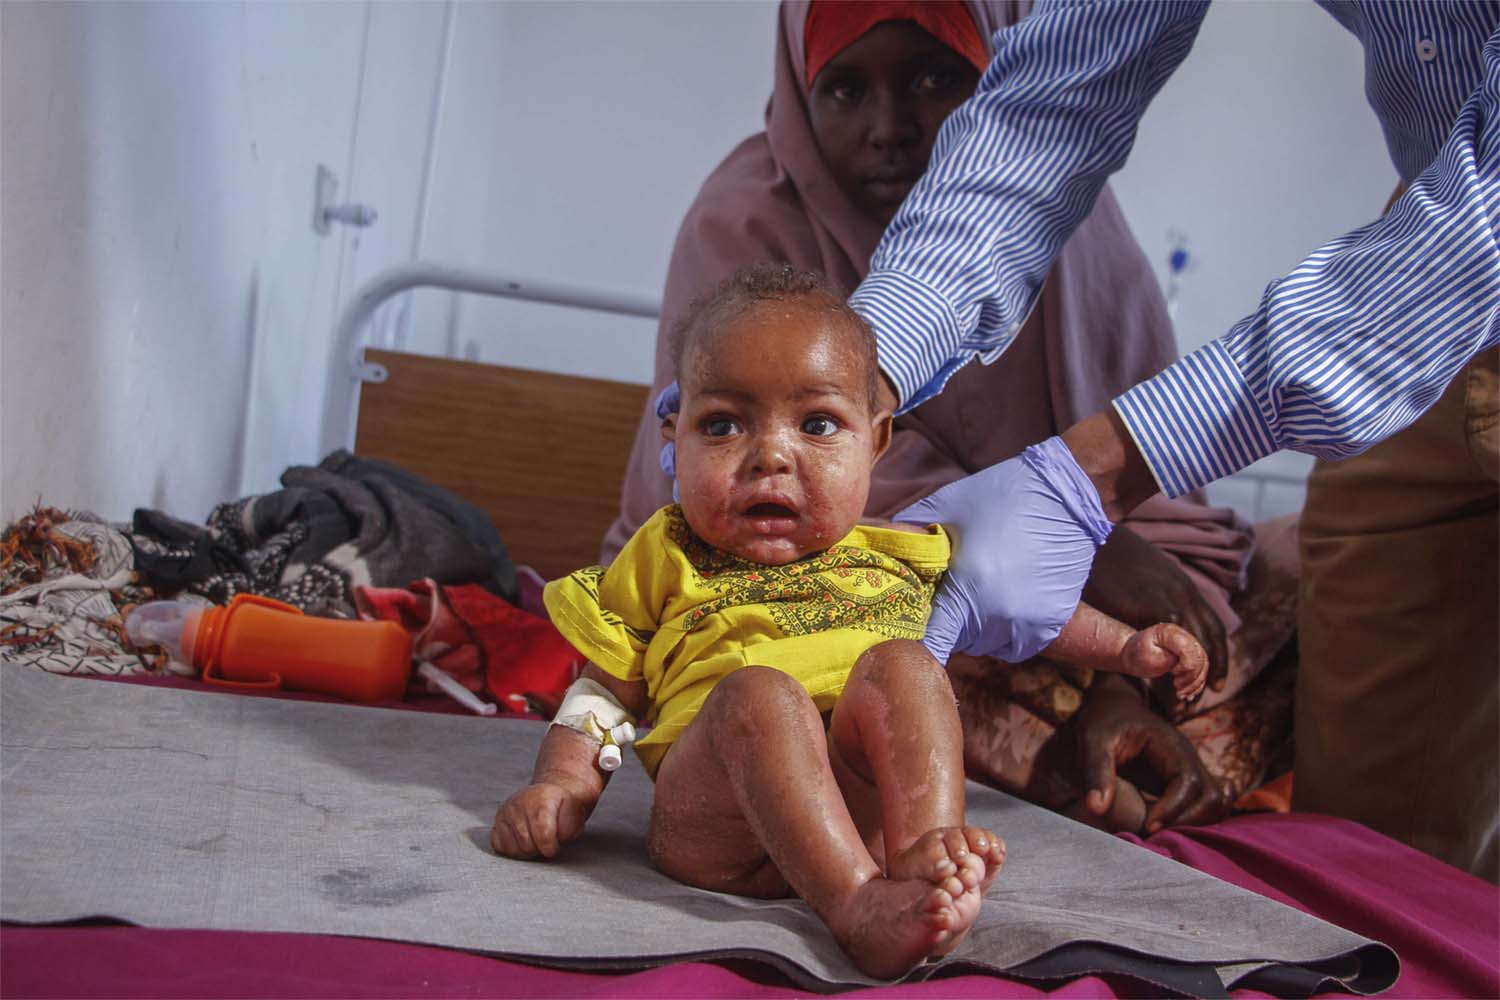 A famine in 2011 in Somalia claimed more than a quarter of a million lives